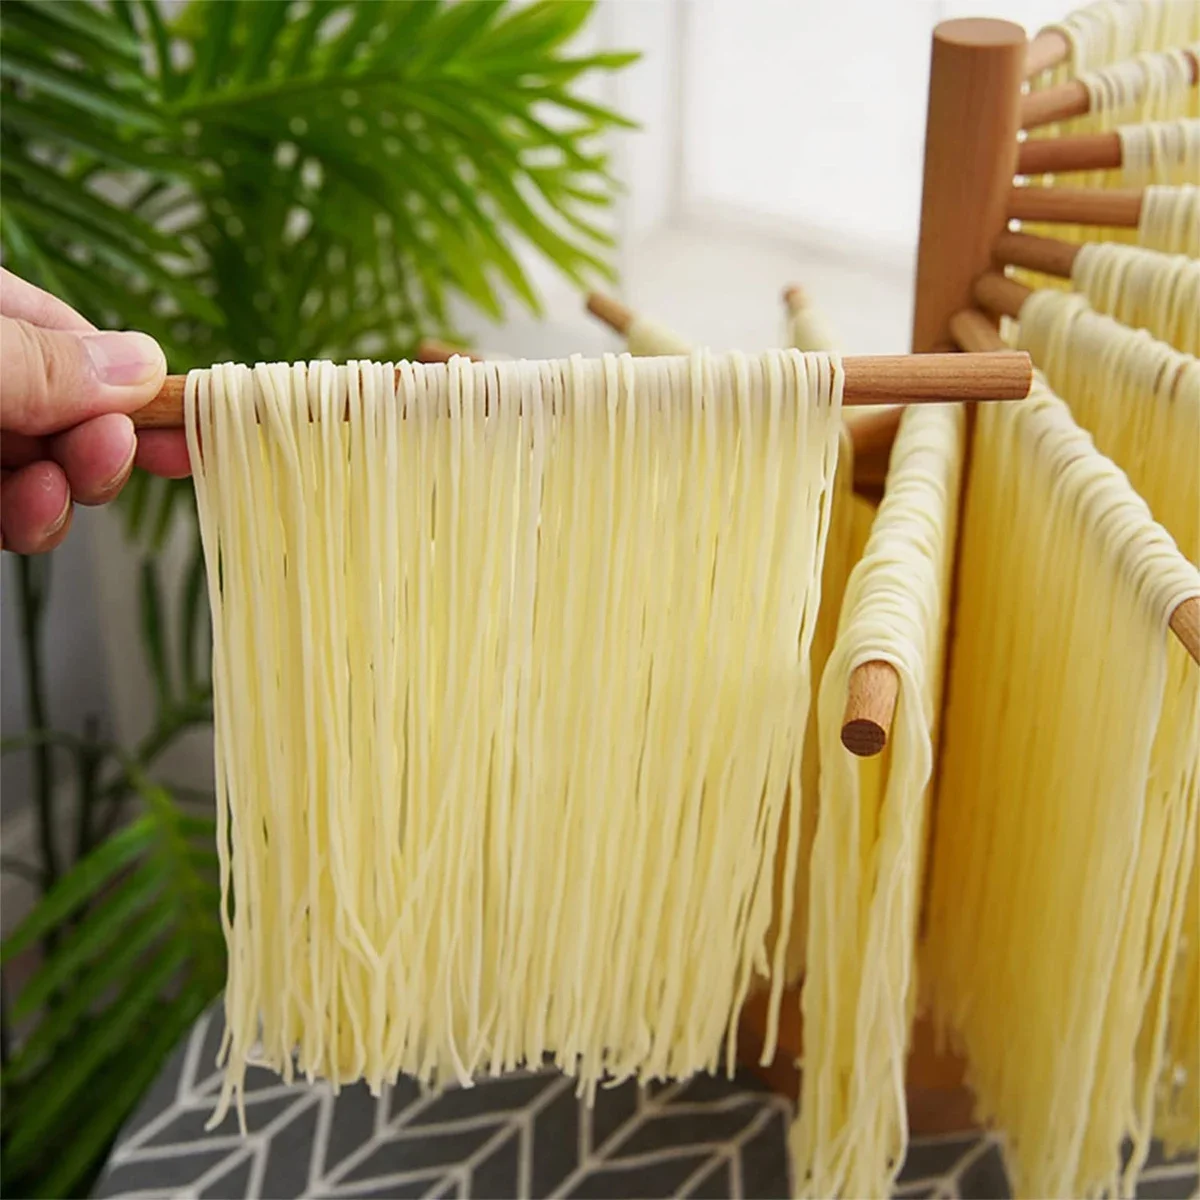 https://ae01.alicdn.com/kf/Seefab760c8f5498abc01b5ae0b63a418X/Pasta-Drying-Rack-Collapsible-Wooden-Spaghetti-Dryer-Stand-Kitchen-Noodles-Drying-Holder-16-Suspension-Rods-Fresh.jpg